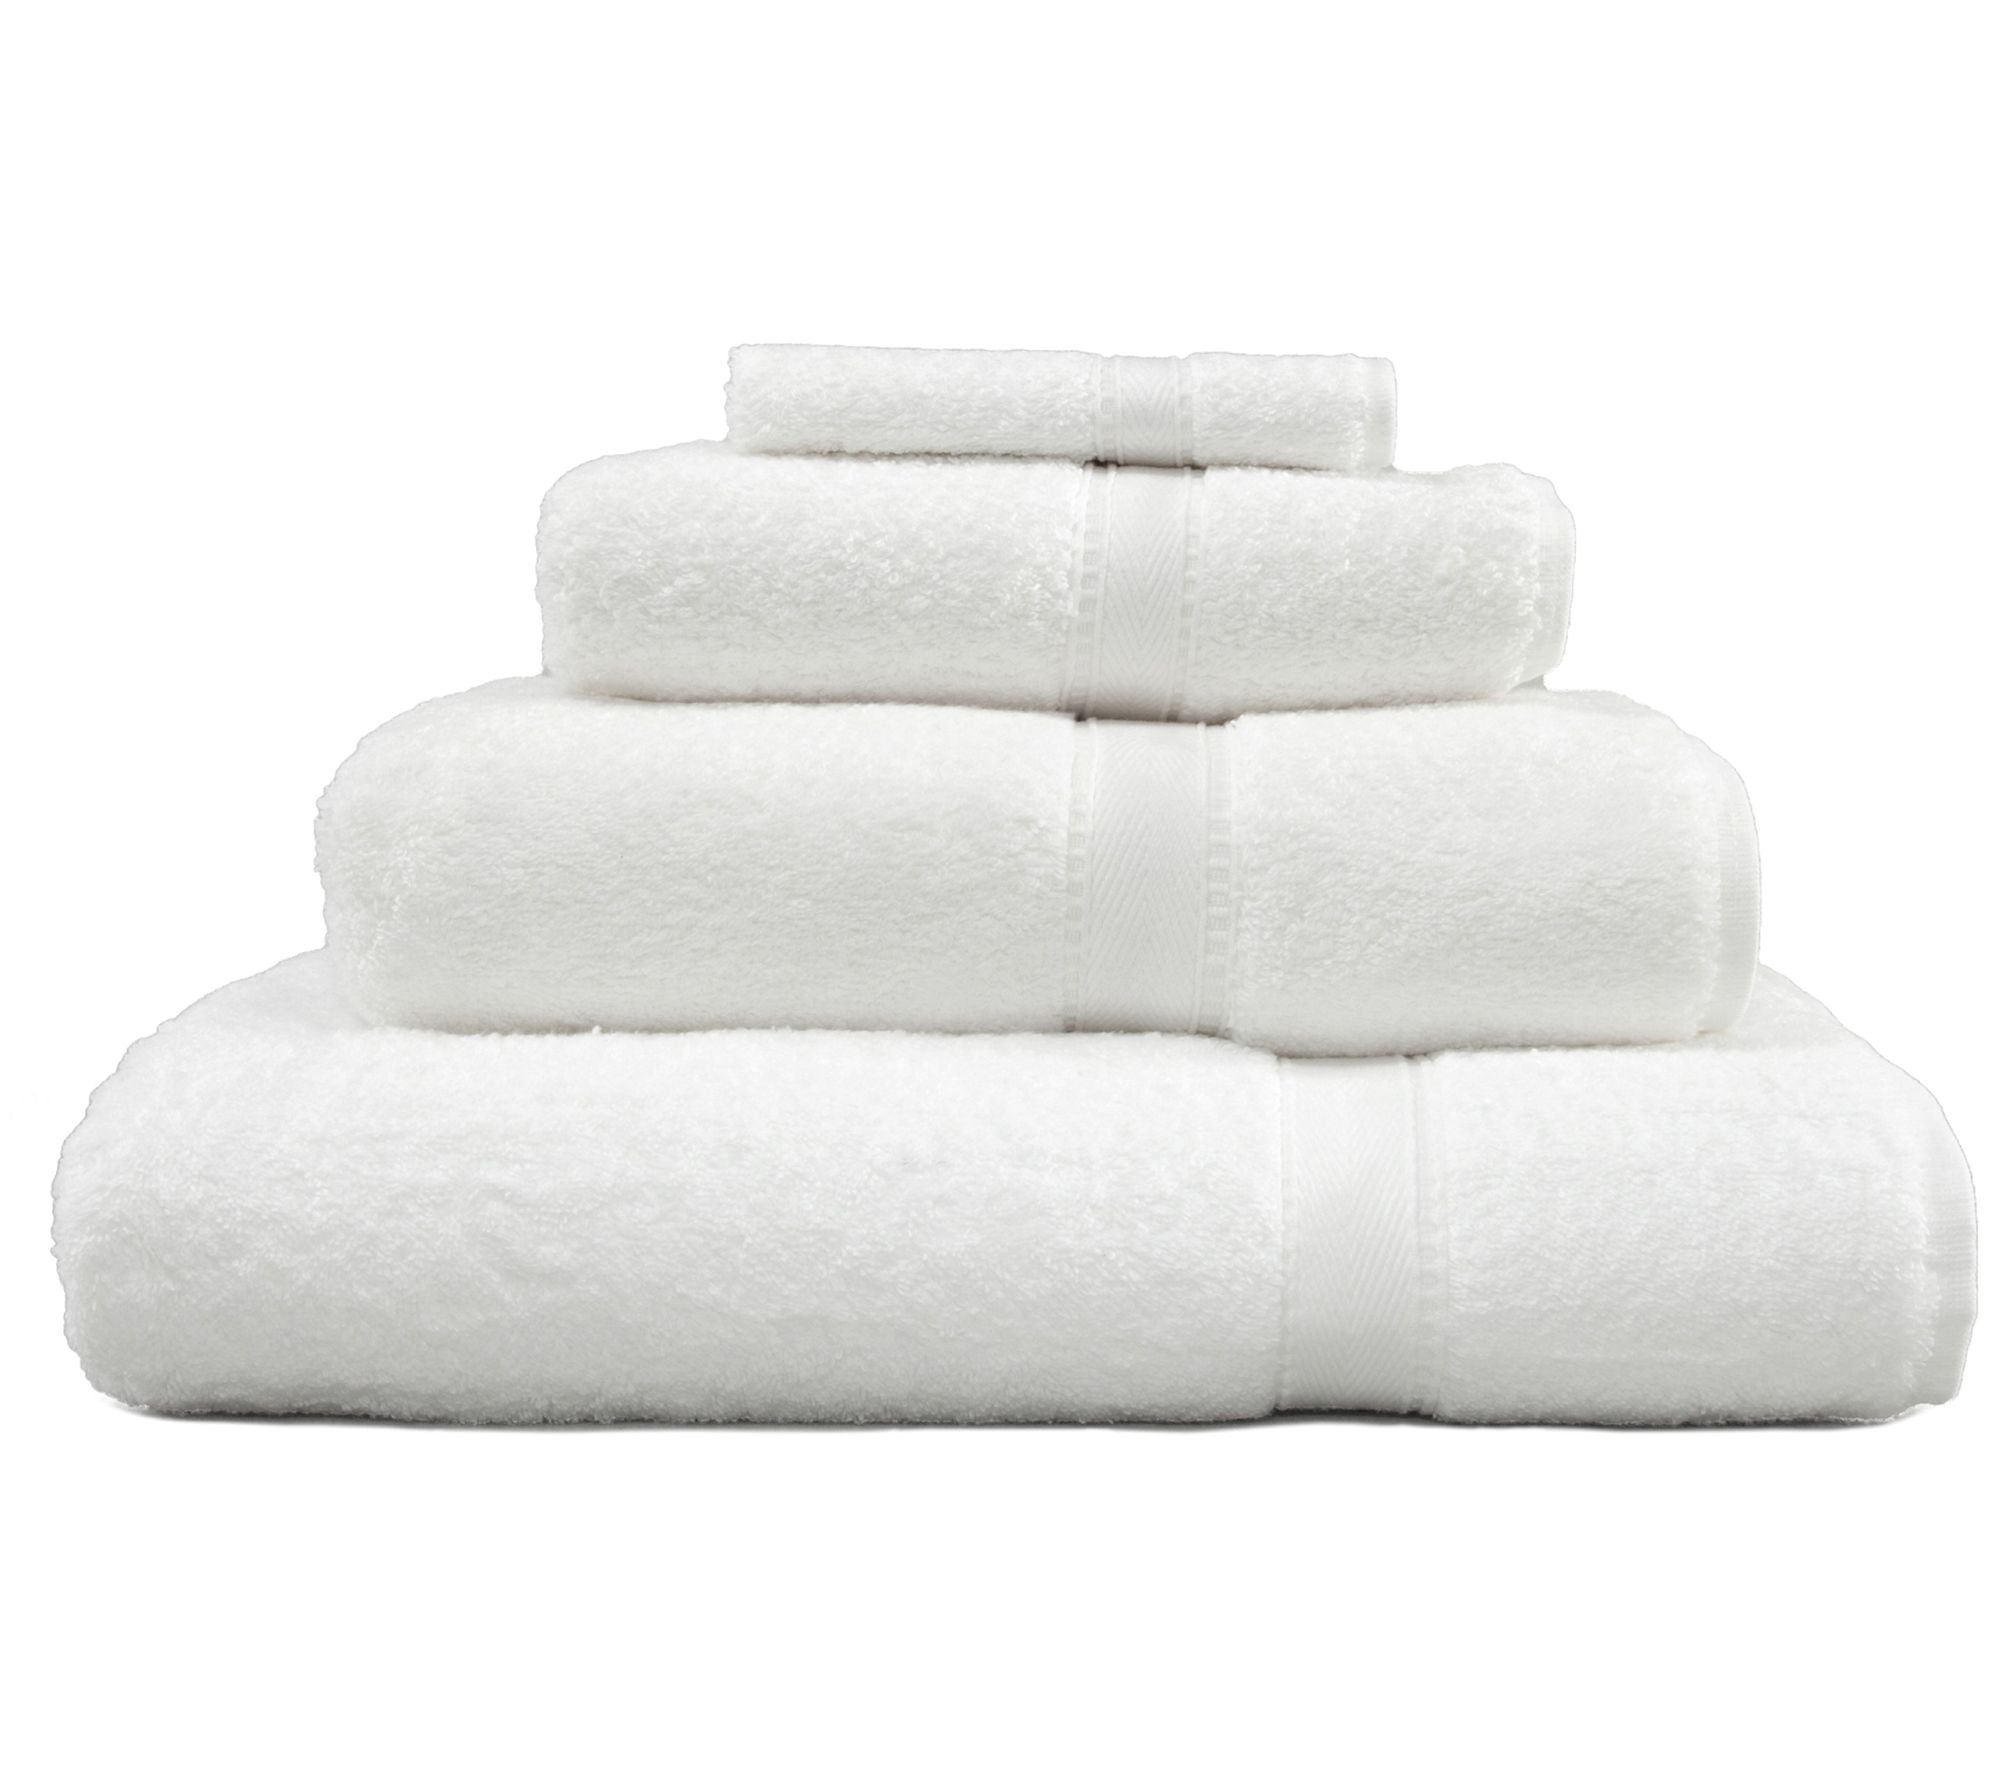 Linum Home Textiles Terry Bath Towel in White (Set of 4)